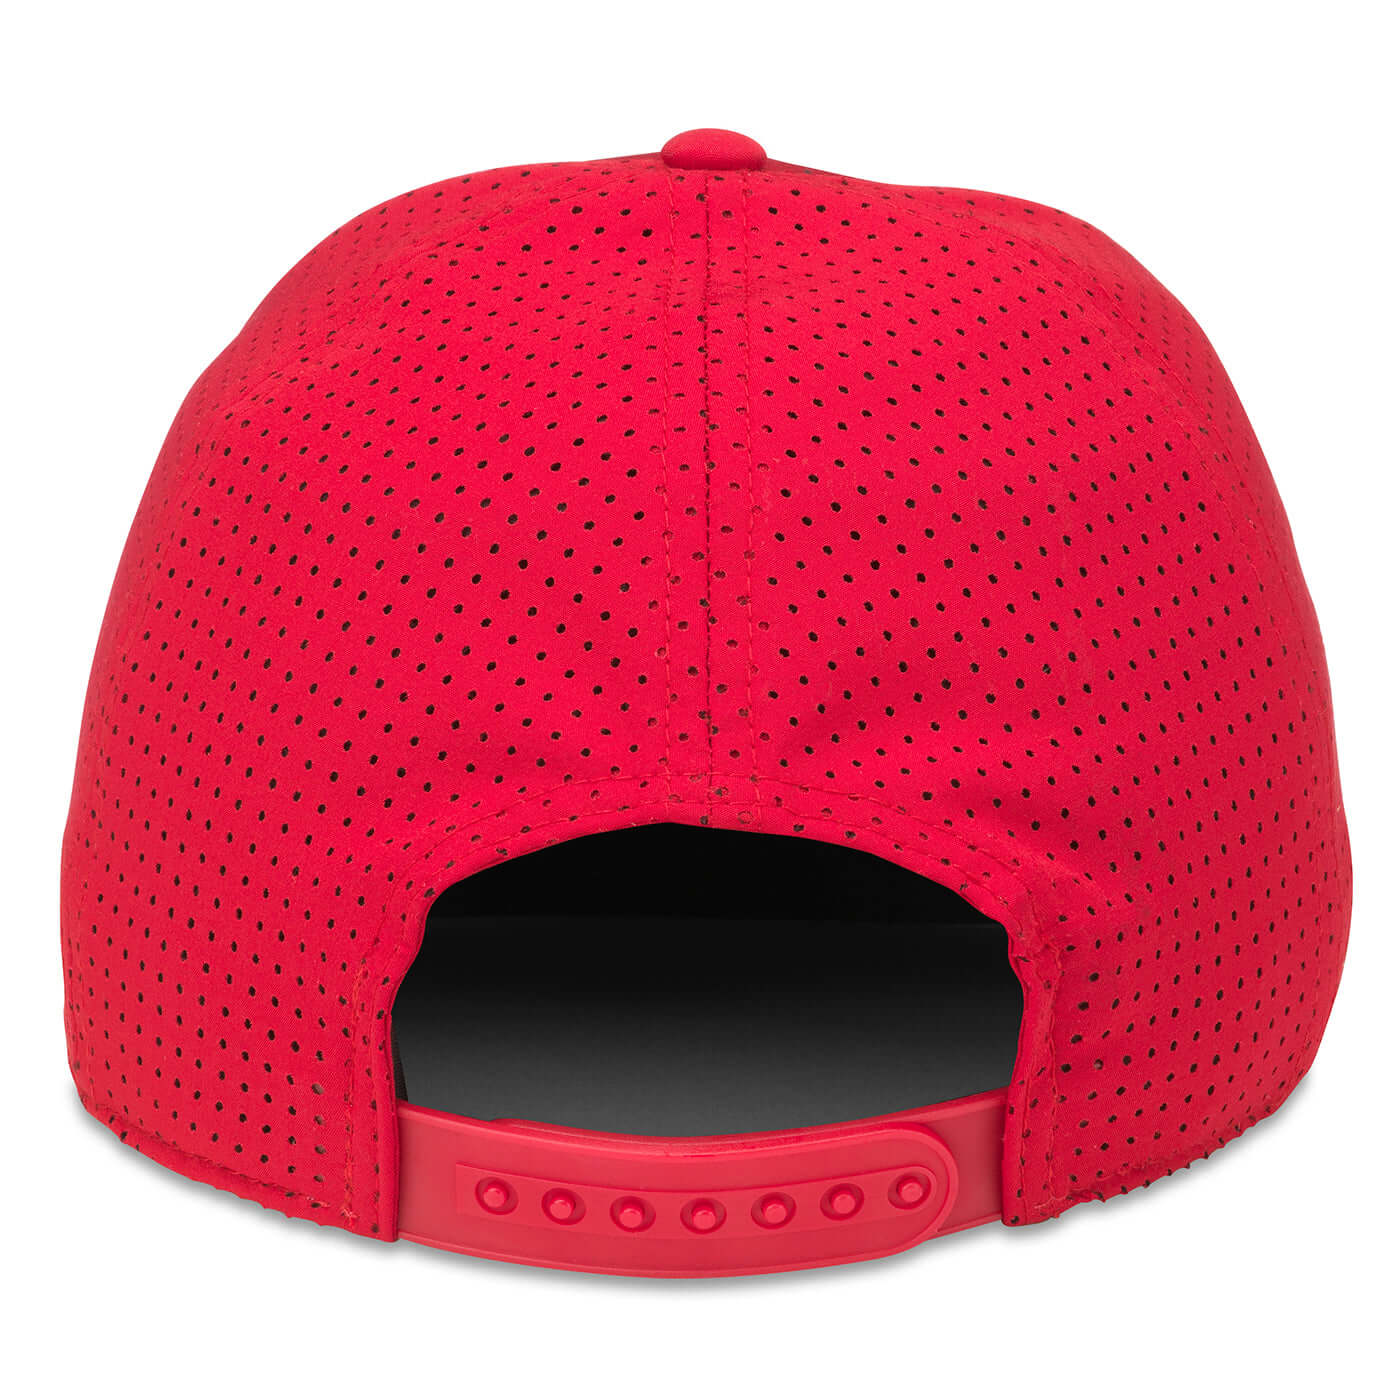 TKO Strength & Performance Hats: Red/White Cooling Mesh PVC Patch Hat | Workout